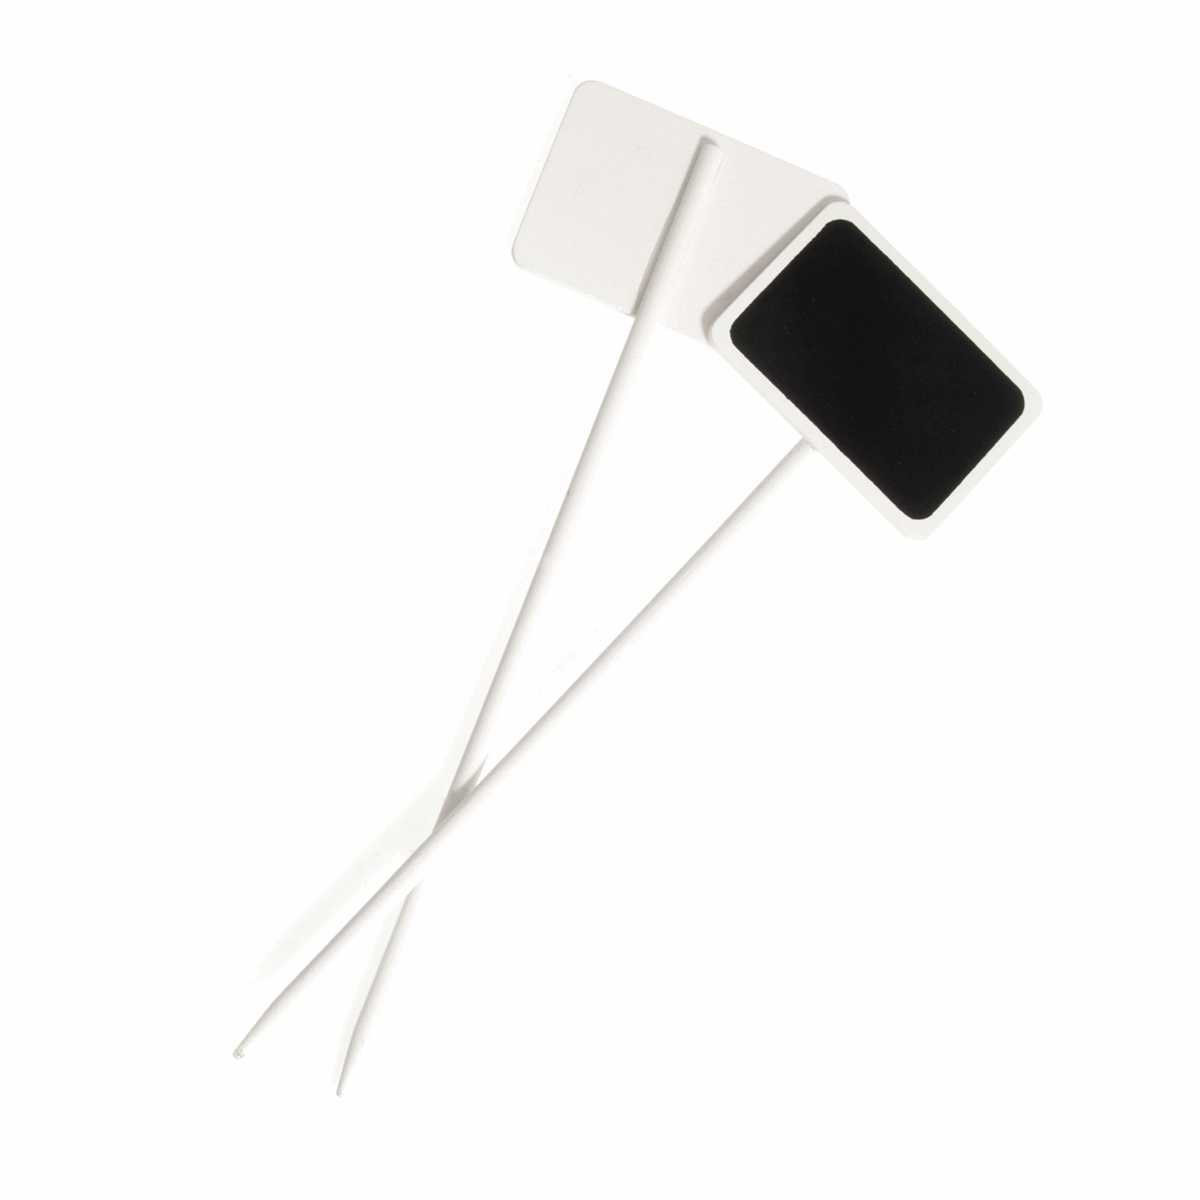 White Rectangle Chalkboards on a Stick - 23 x 7cm (Pack of 2)